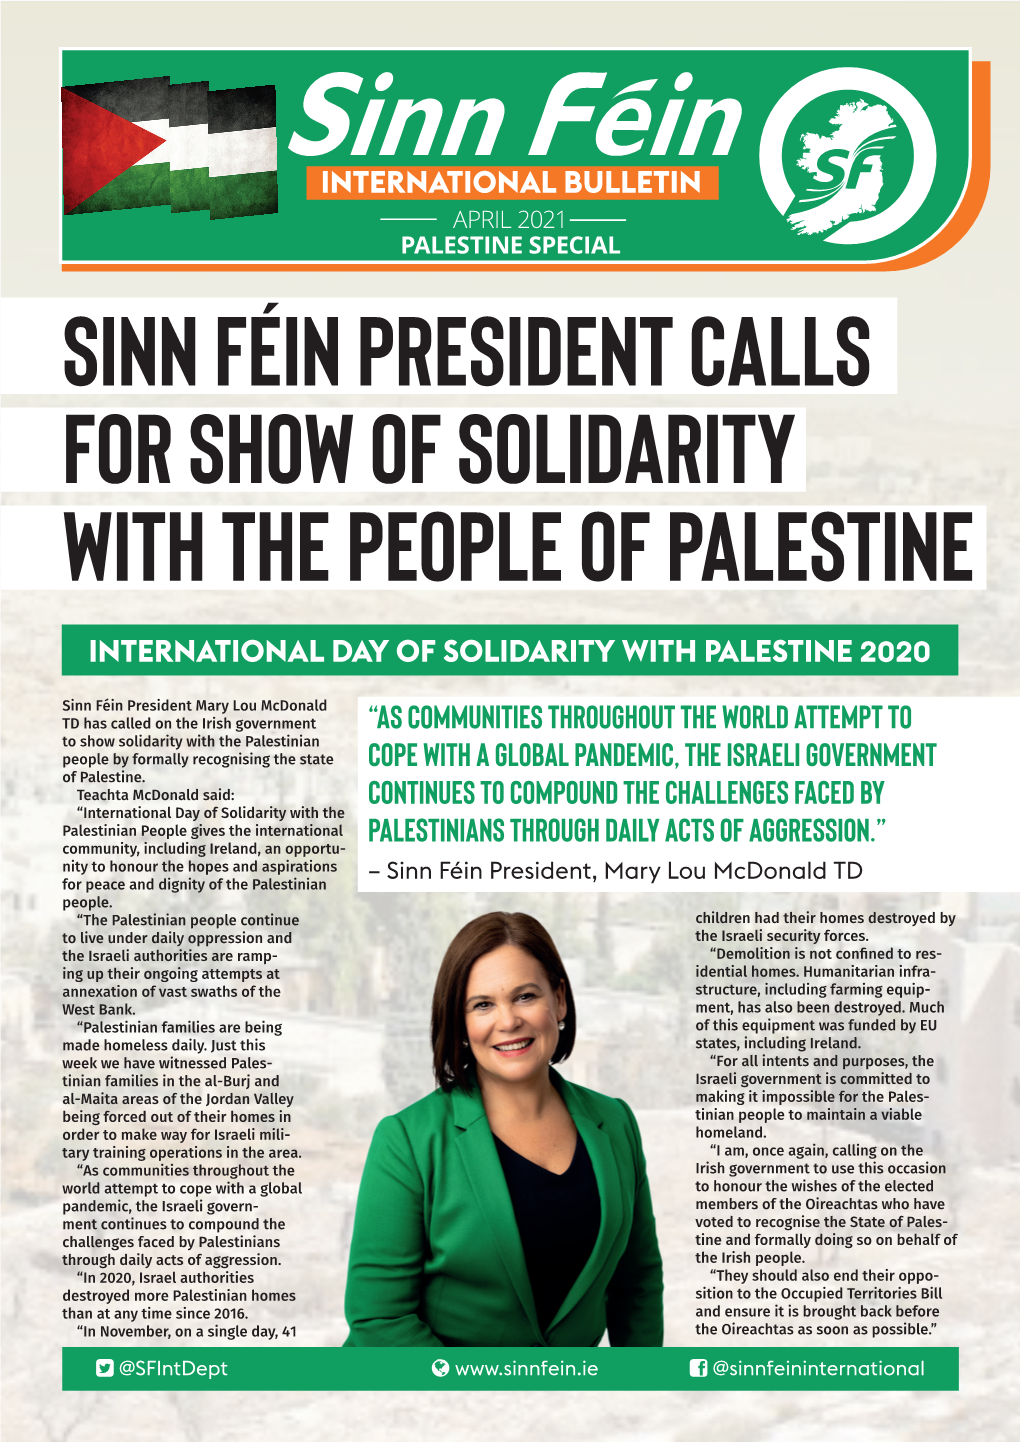 Sinn Féin President Calls for Show of Solidarity with the People of Palestine